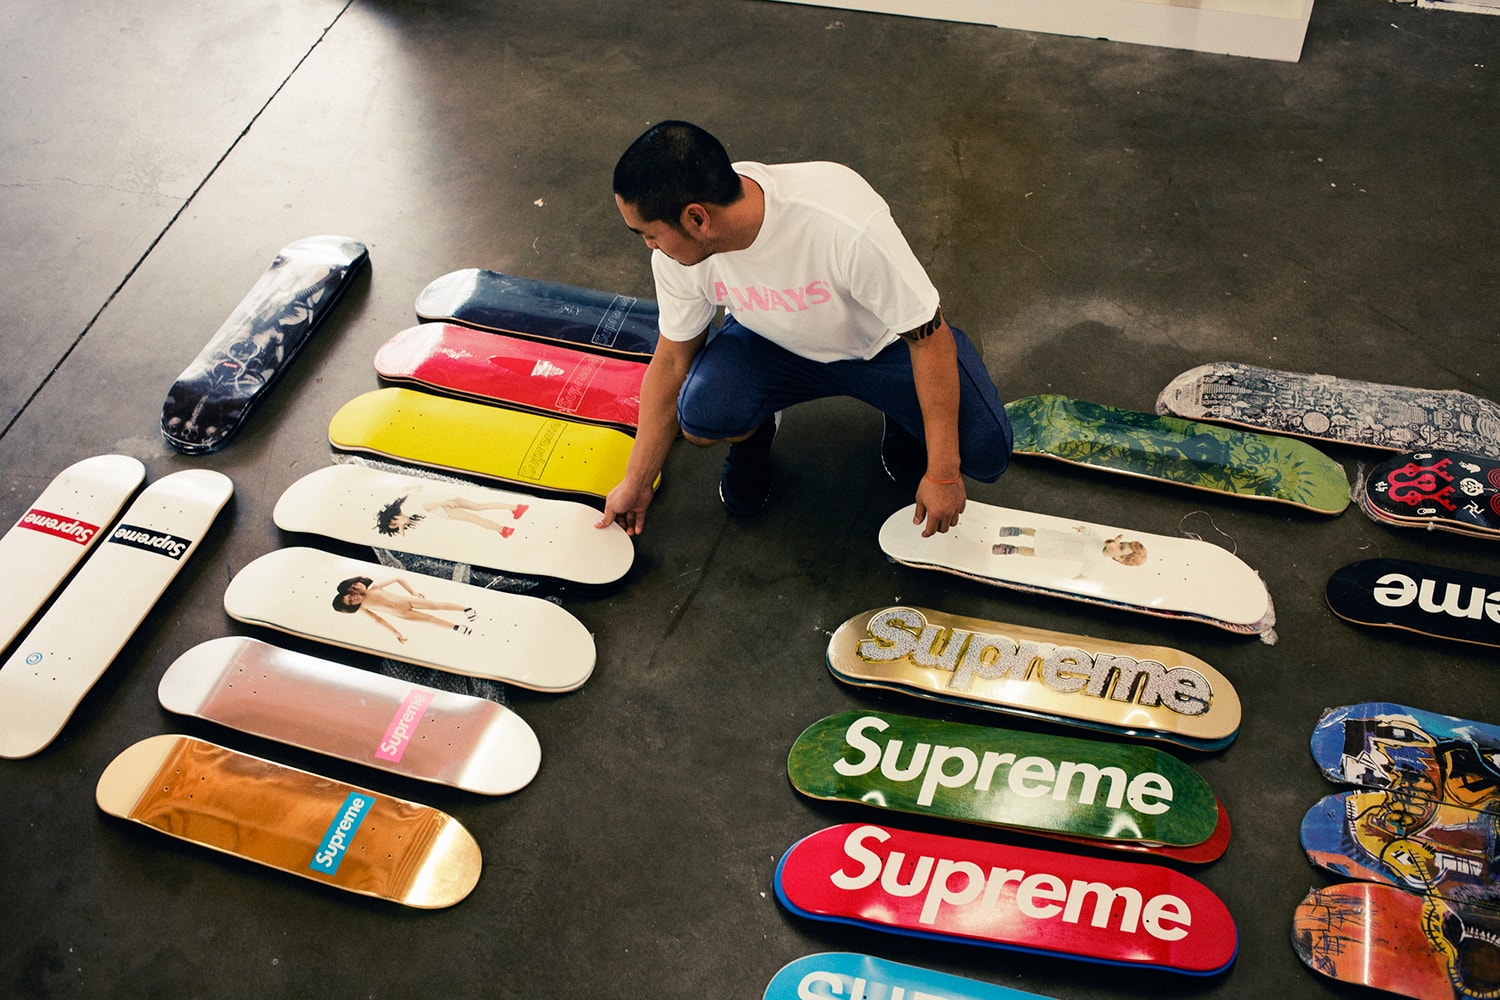 Meet the Young Collector Who Bought the Complete Supreme Skateboard  Collection, Interviews